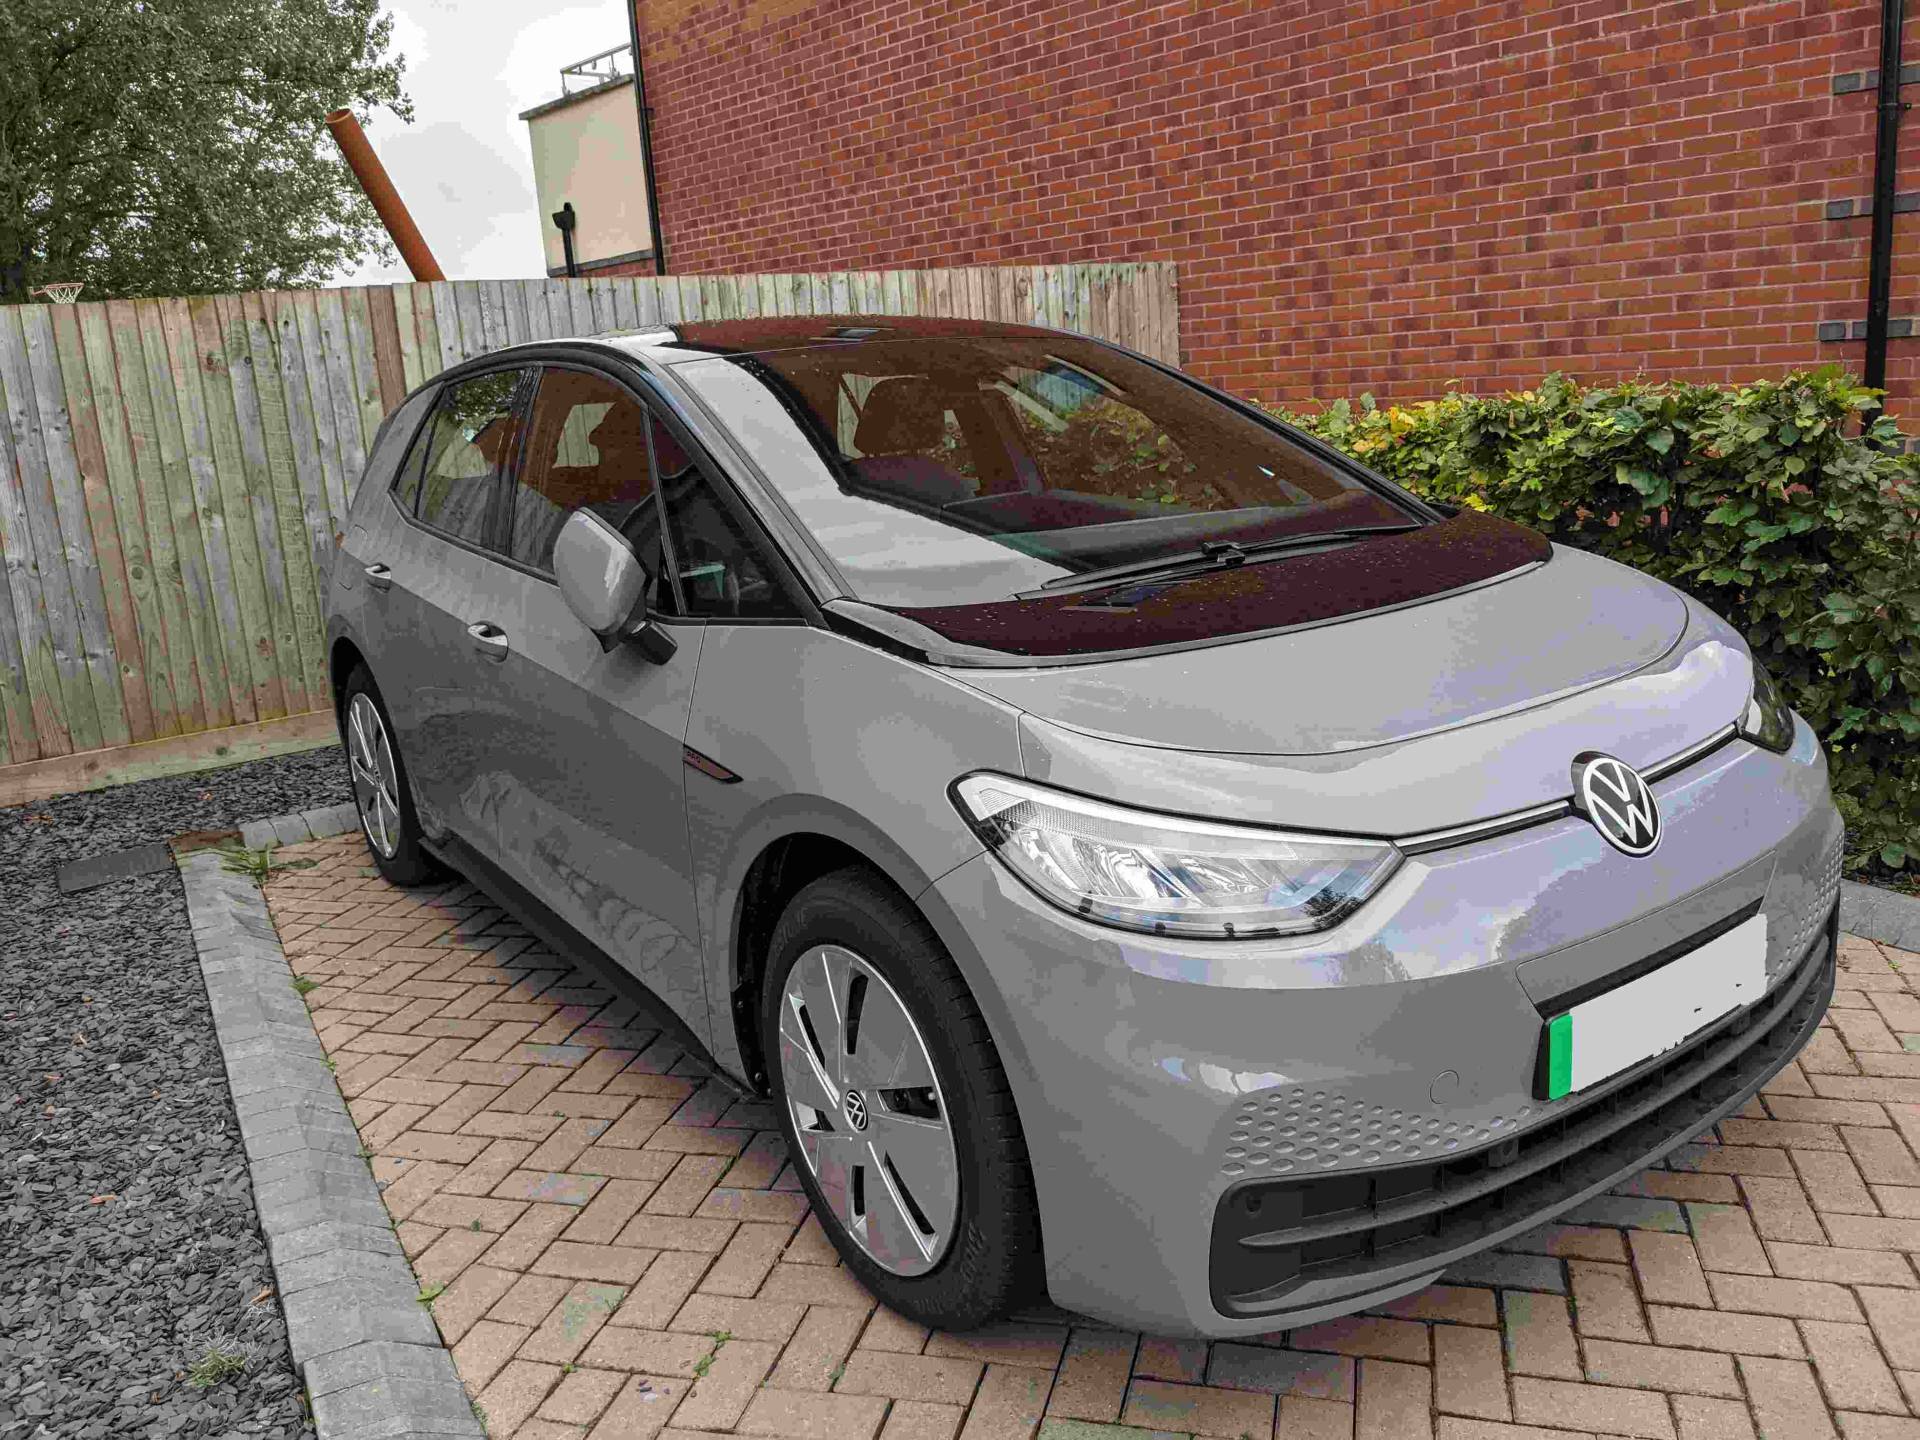 Lease or Buy an Electric Car | Compare UK Electric Cars 2021